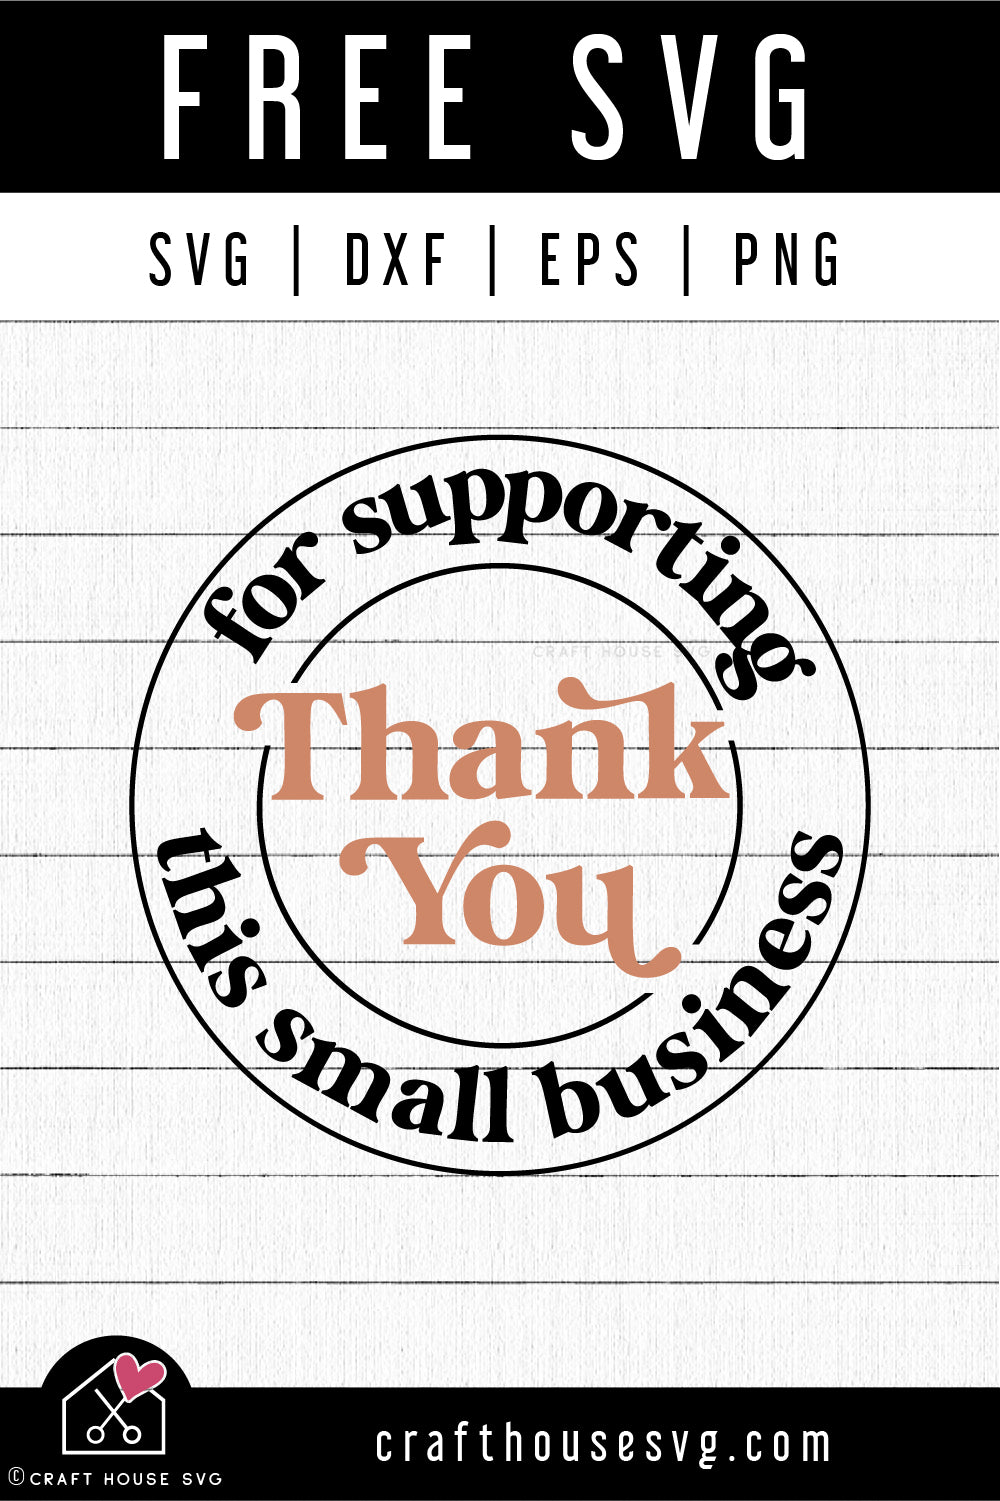 FREE Small Business SVG Thank You Cut File - Craft House SVG